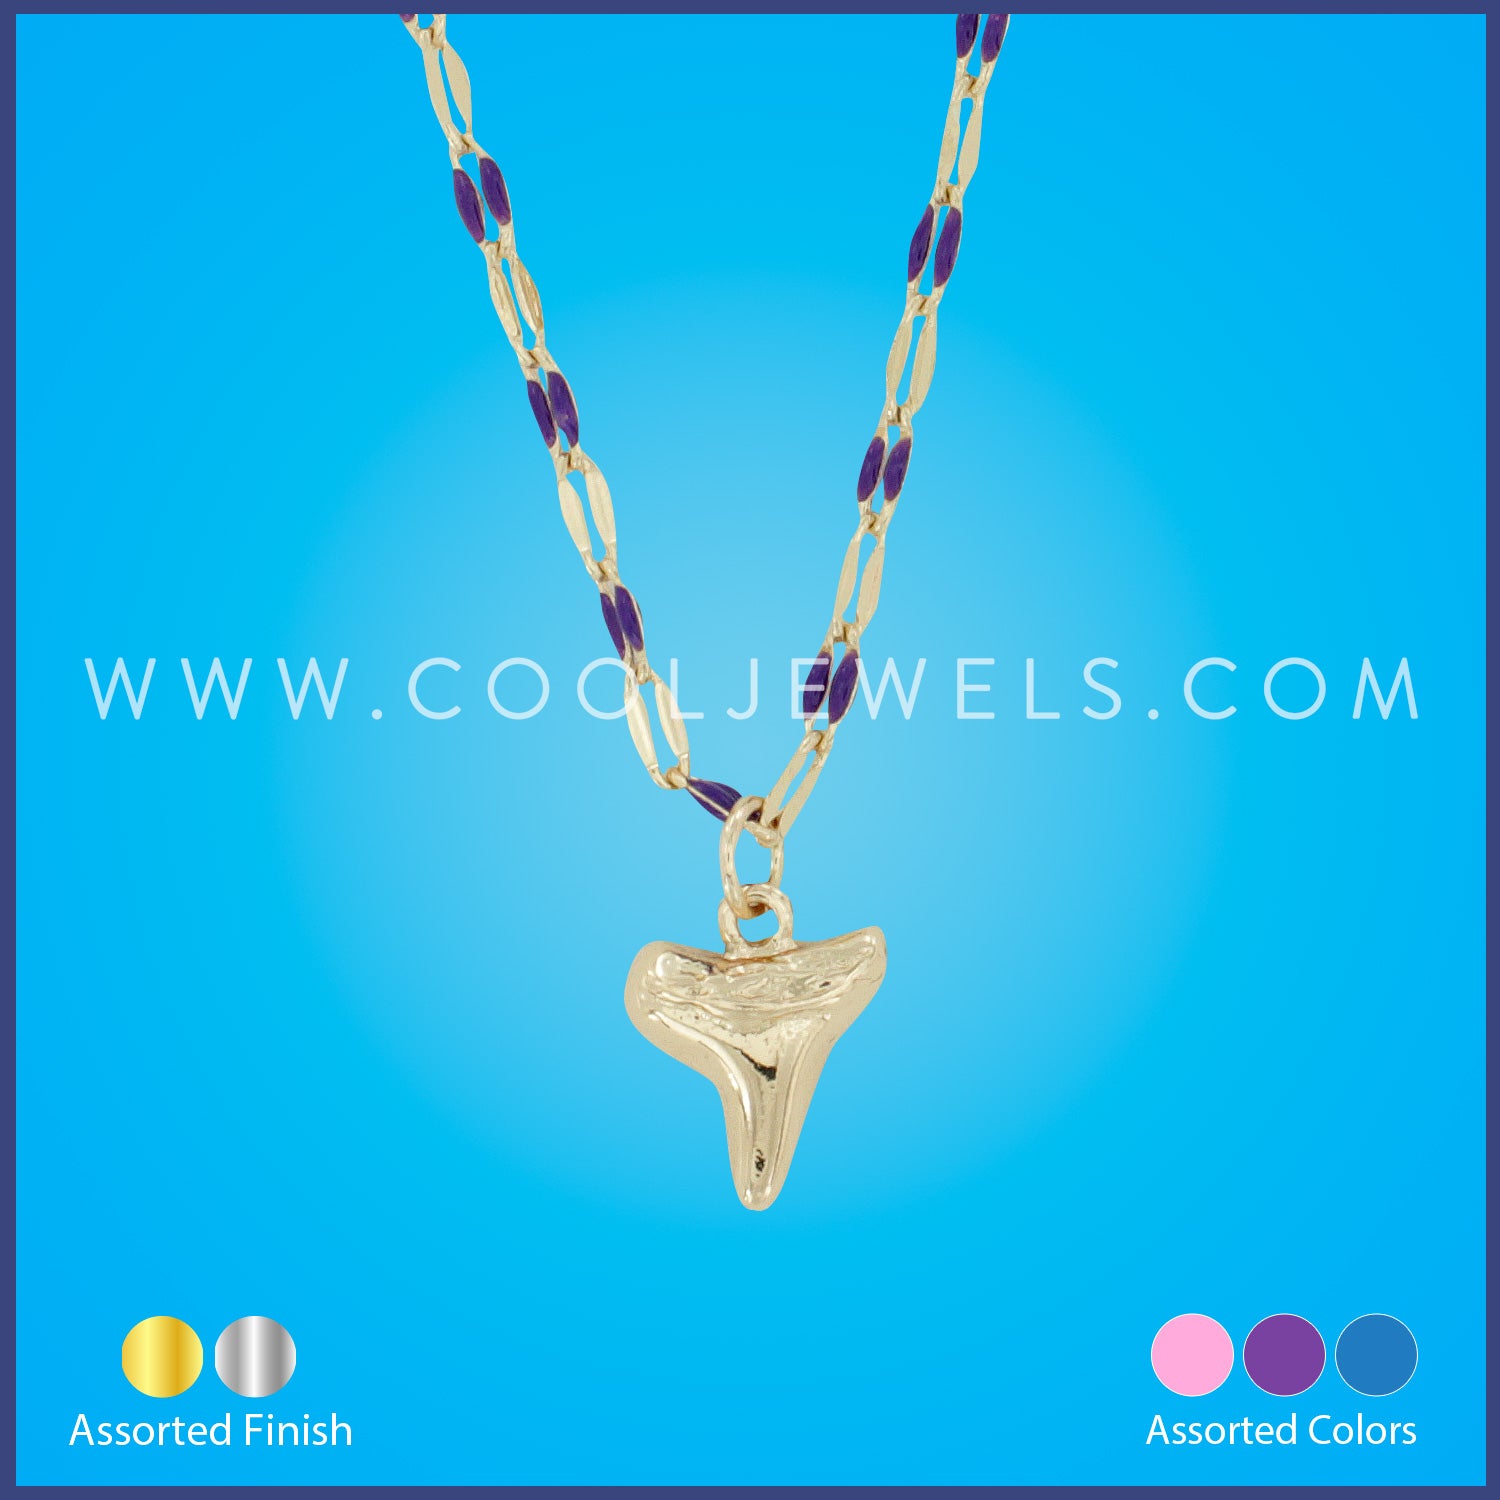 COLORED CHAIN NECKLACE WITH METAL TOOTH PENDANT - ASSORTED